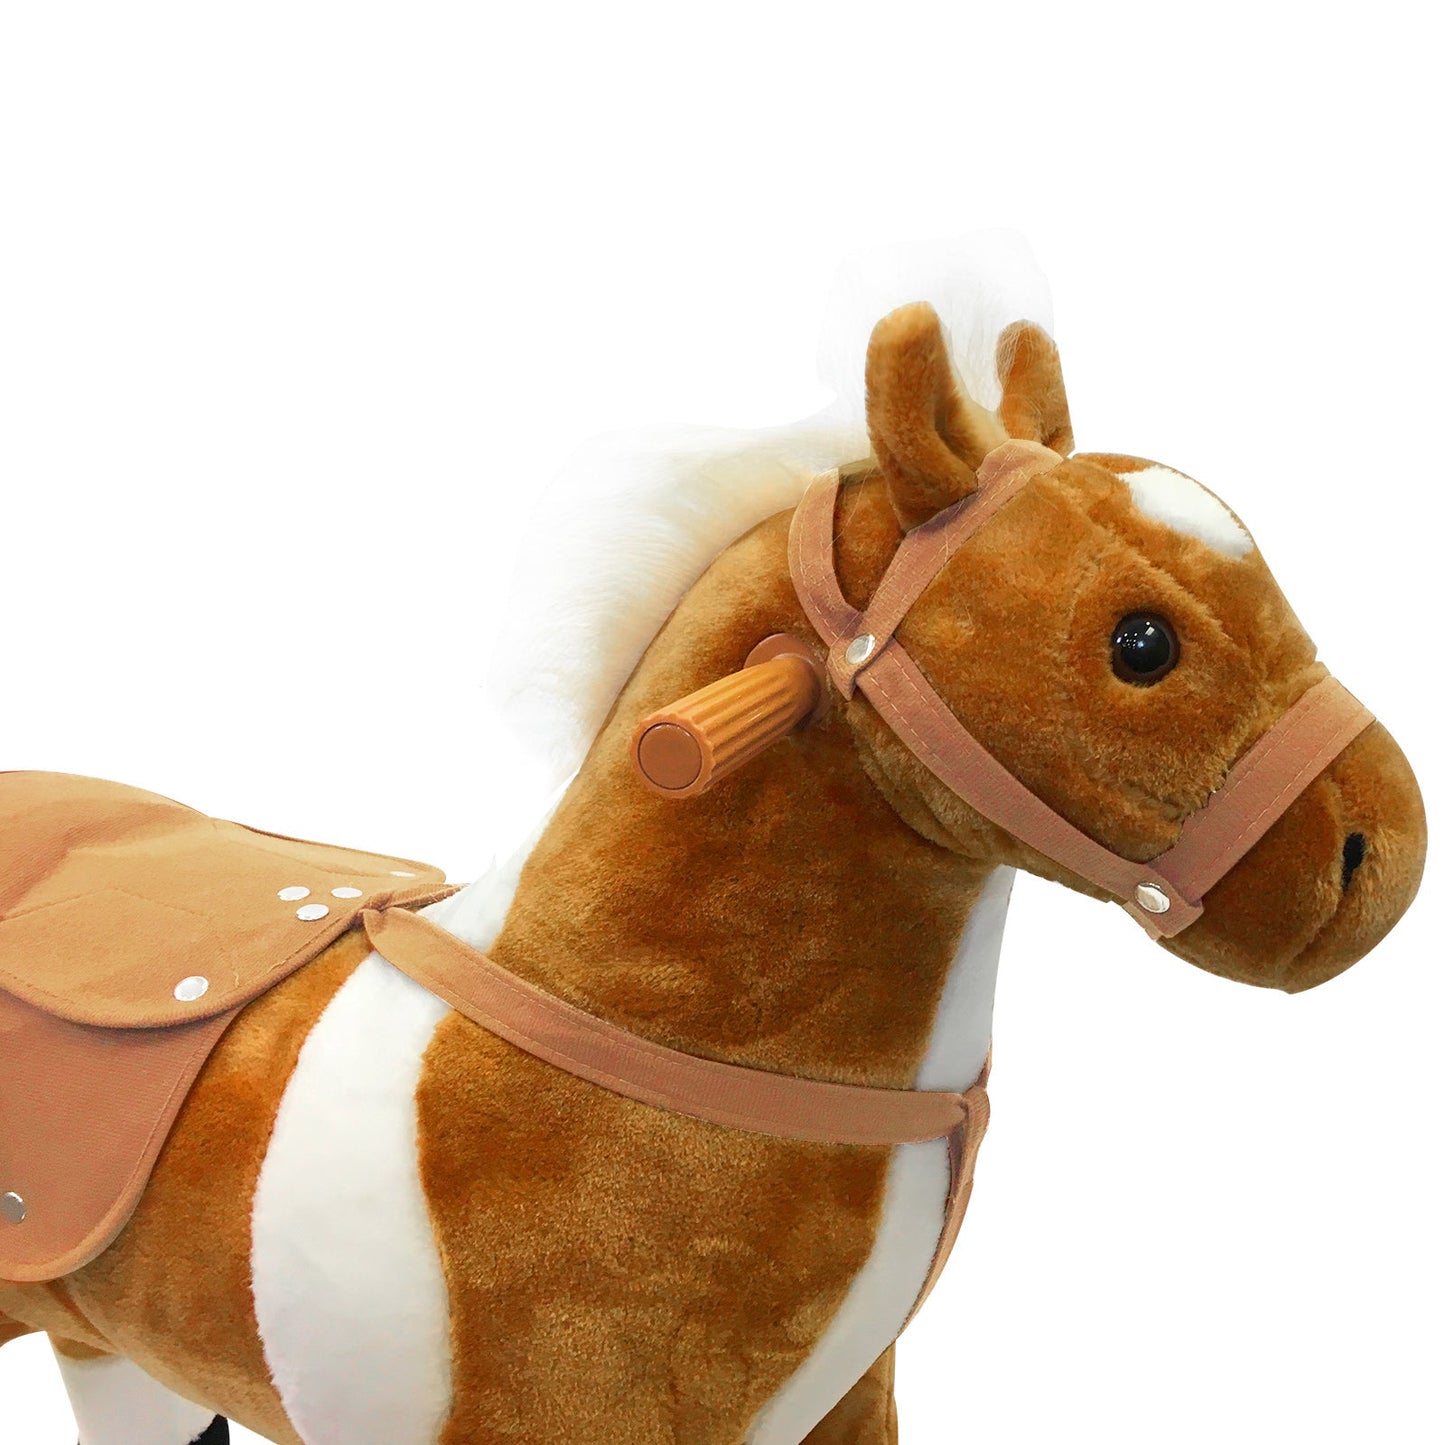 Kids Rocking Horse, Large Walking Ride on Toy for Toddlers 3 year old, Baby Plush Animal Rocker with Sound and Wheel, Brown at Gallery Canada